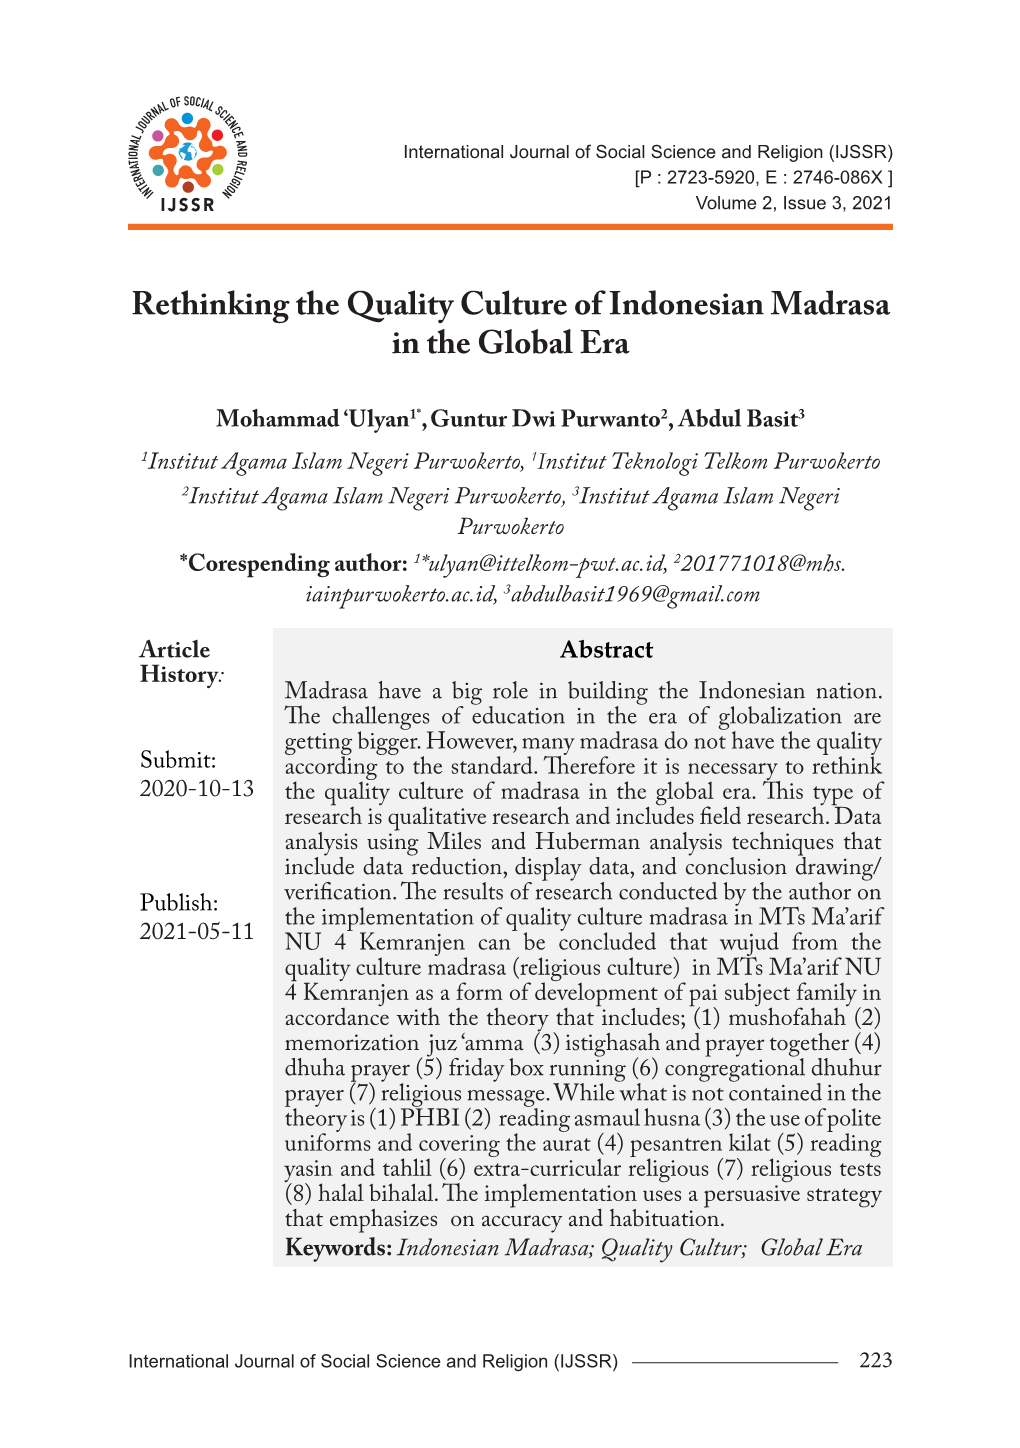 Rethinking the Quality Culture of Indonesian Madrasa in the Global Era